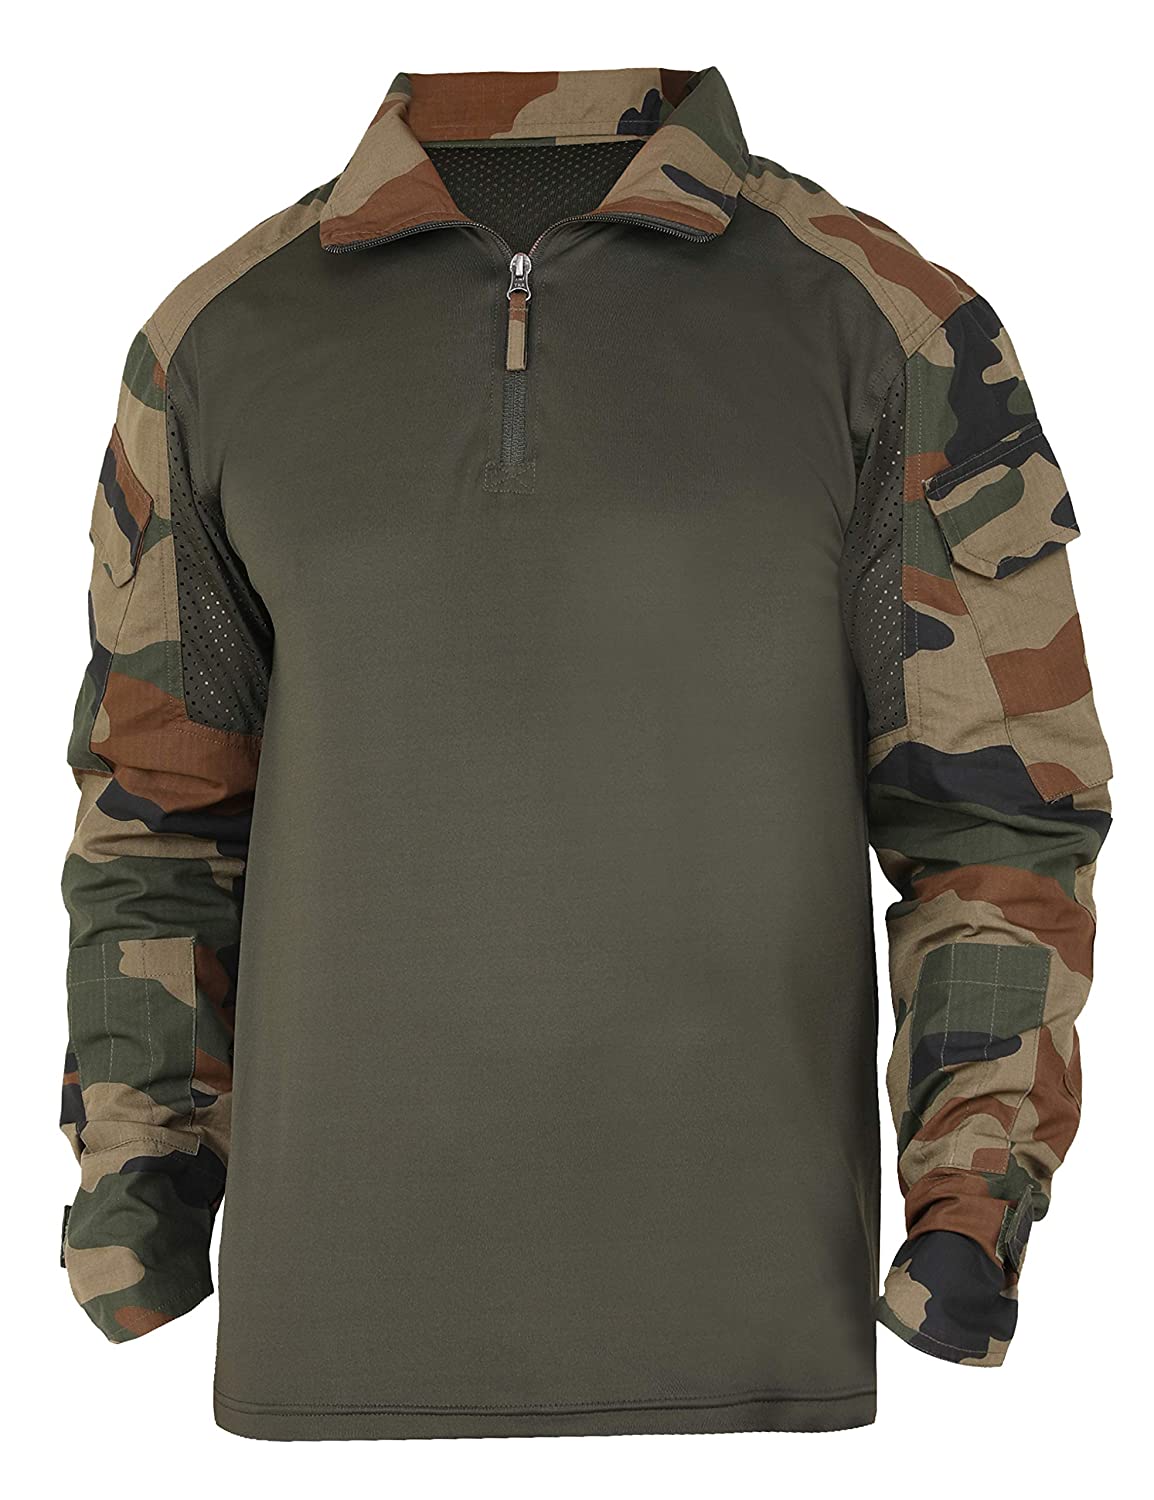 Tactical T Shirt Full Sleeves-Army Print